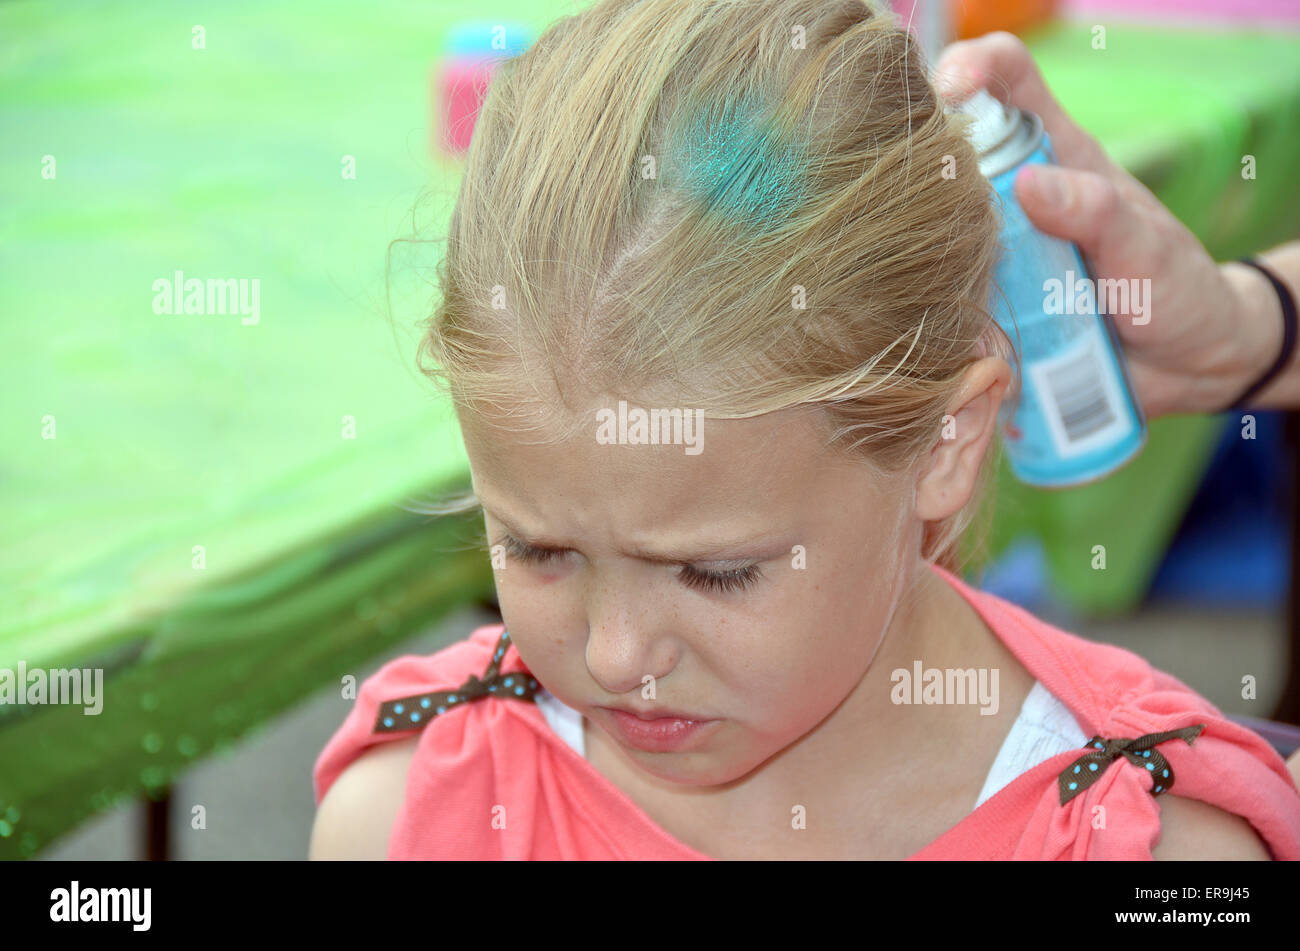 Young Caucasian girl getting her blond hair spray painted. Stock Photo